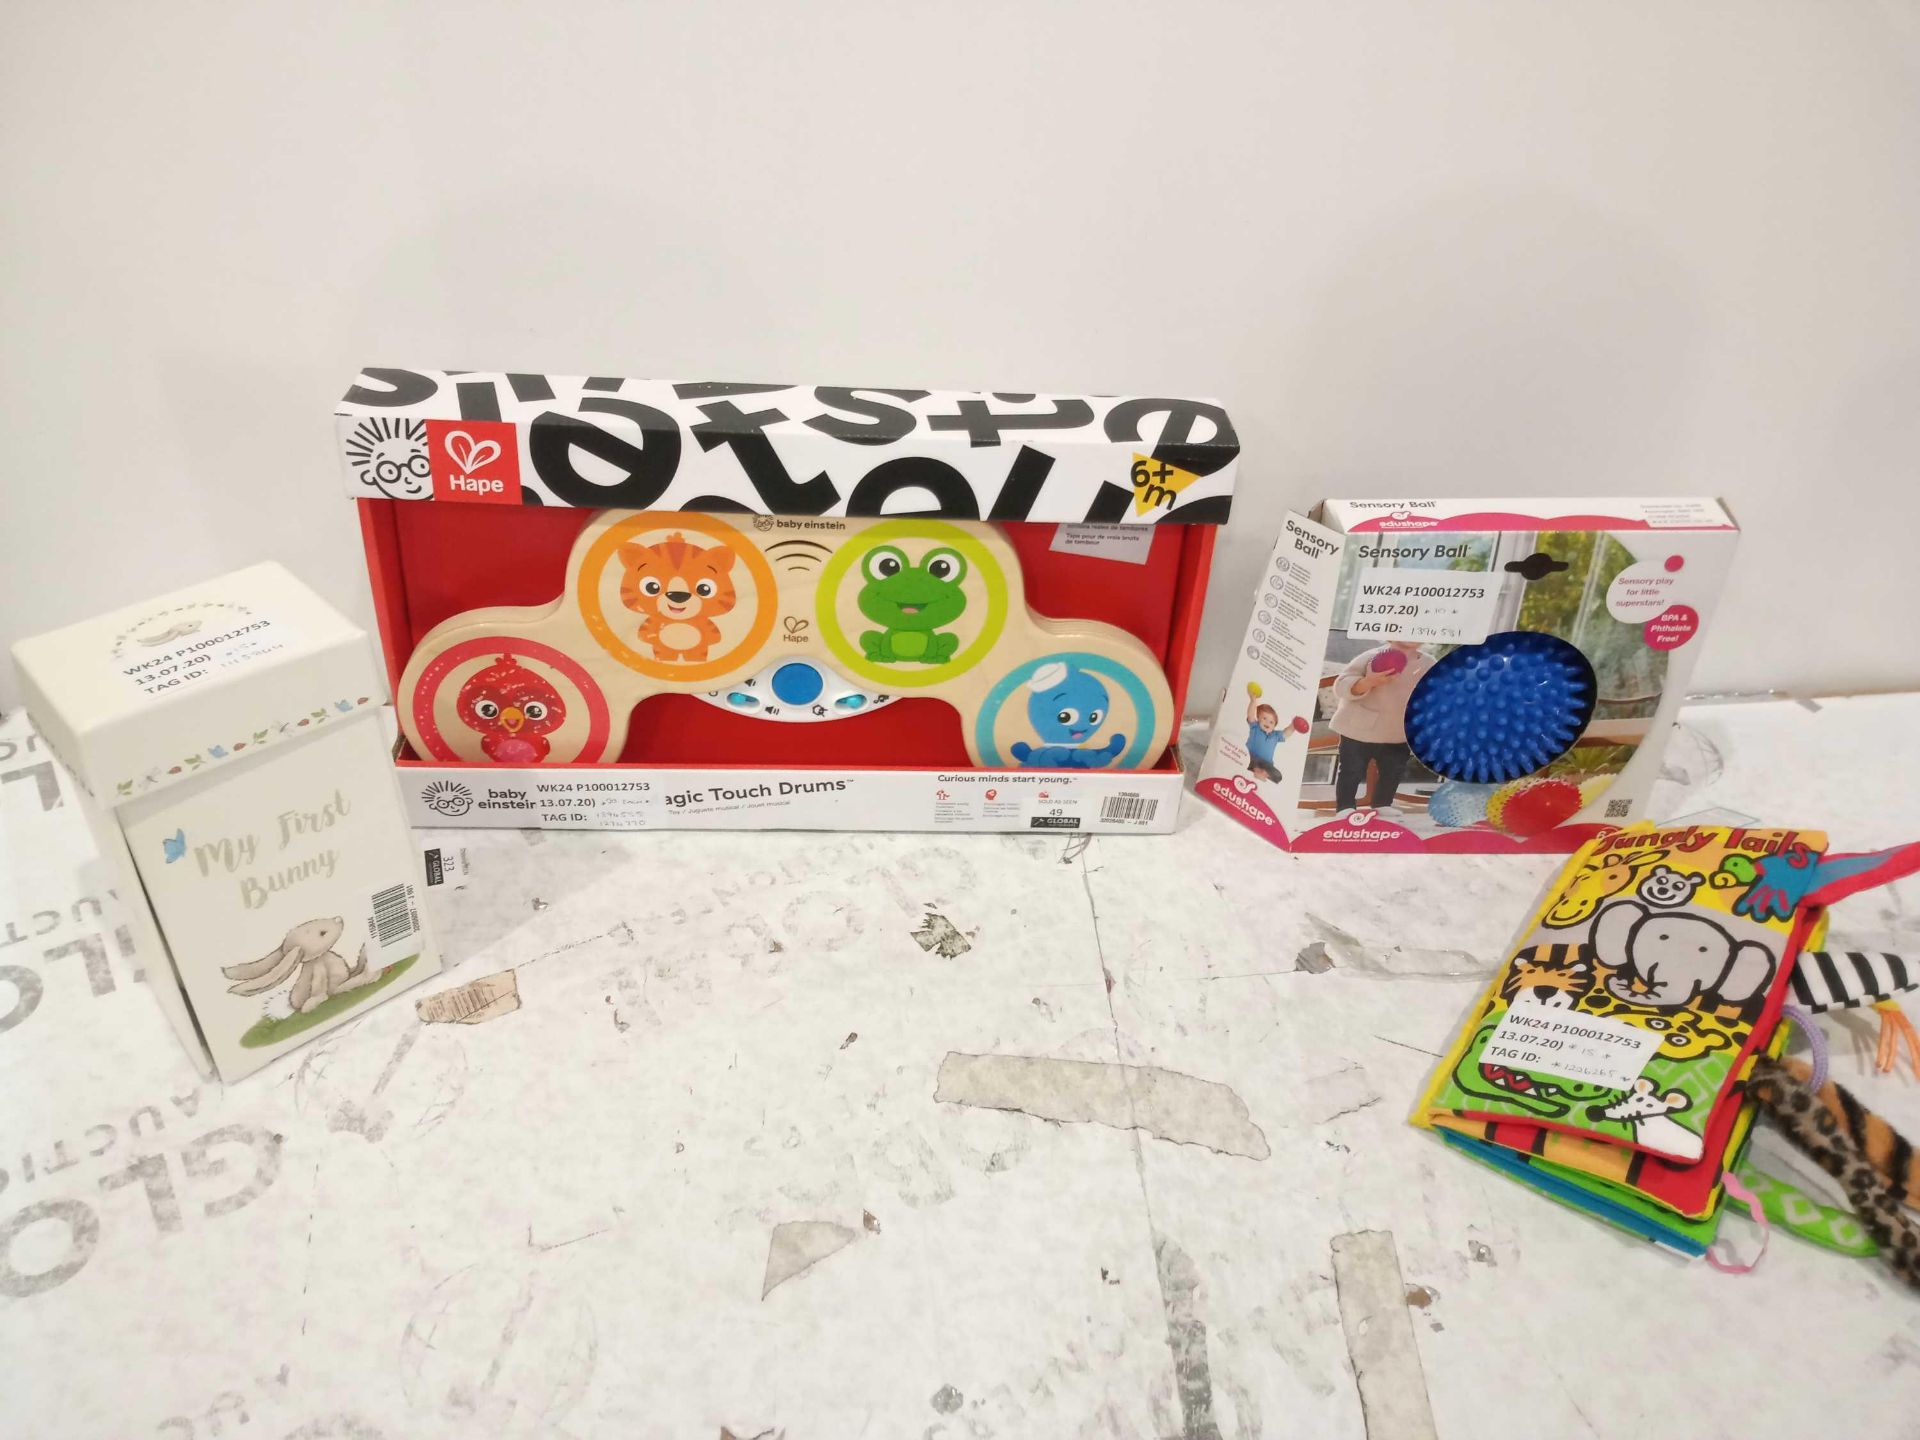 15 To £20 Each 5 Assorted Children'S Toy Items And Sensory Balls